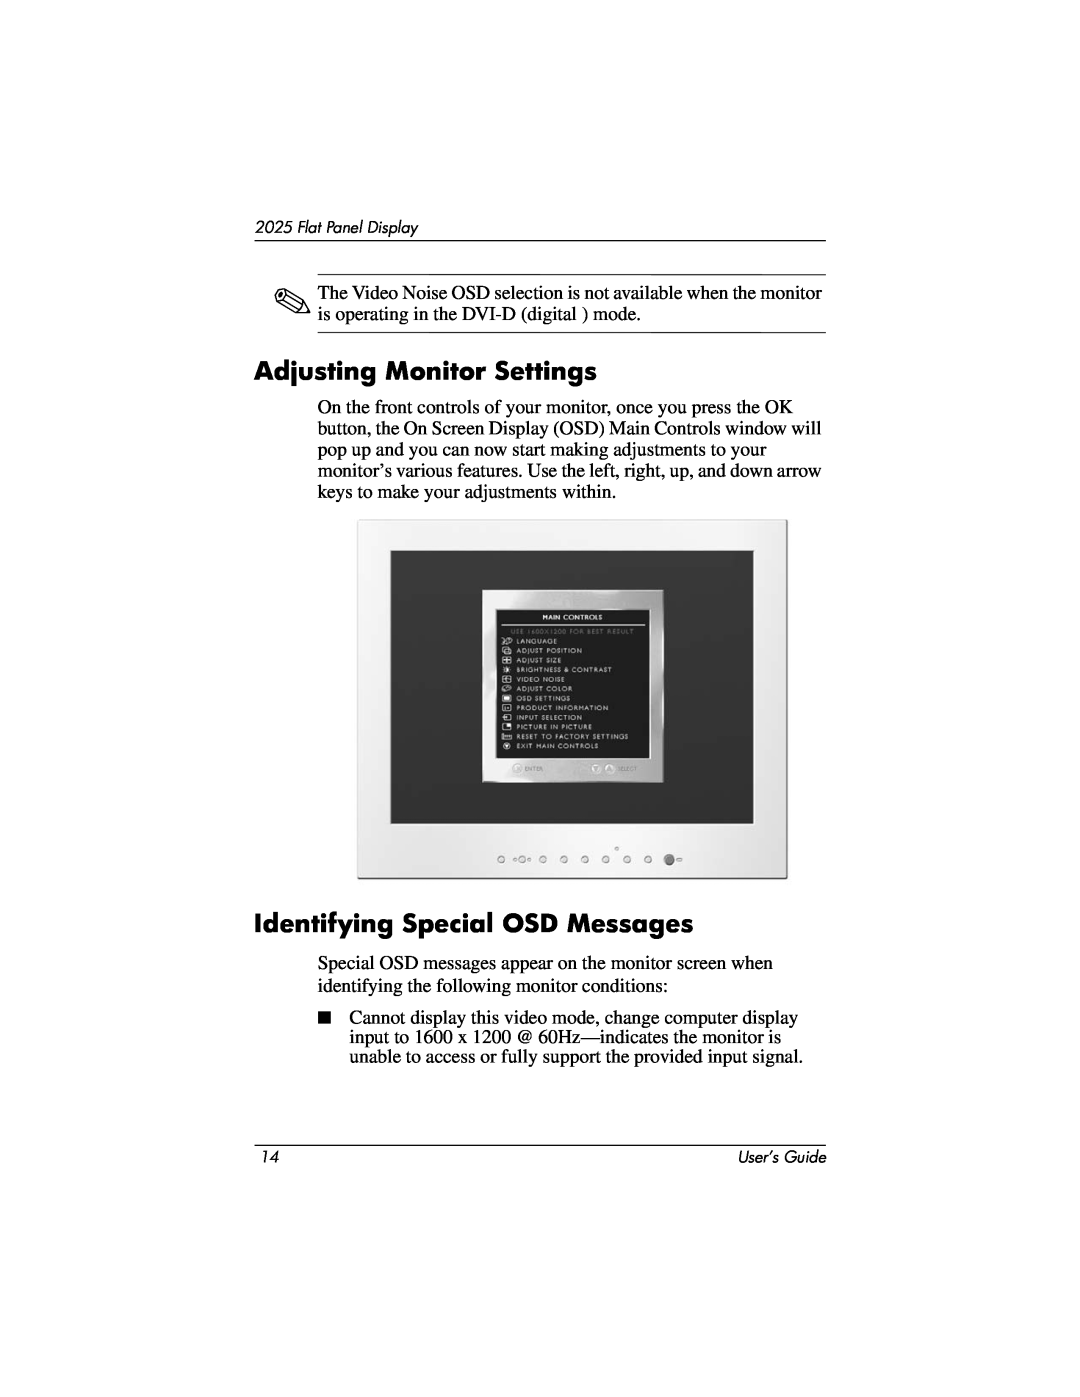 Compaq 2025 manual Adjusting Monitor Settings, Identifying Special OSD Messages 